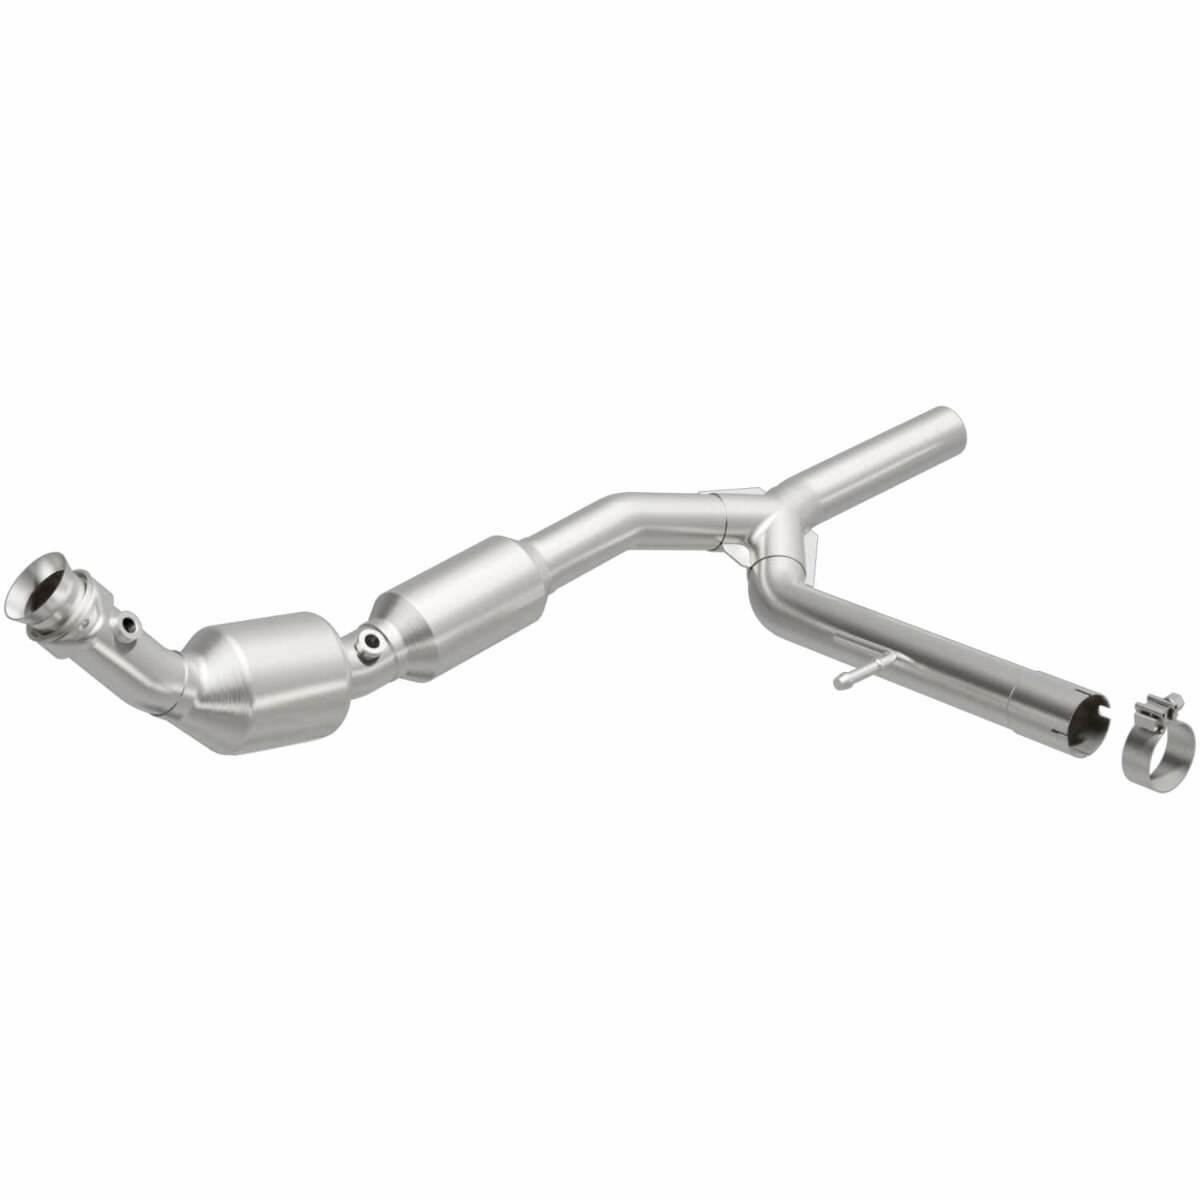 2004-2005 Ford F-150 5.4L Direct-Fit Catalytic Converter 5481706 Magnaflow